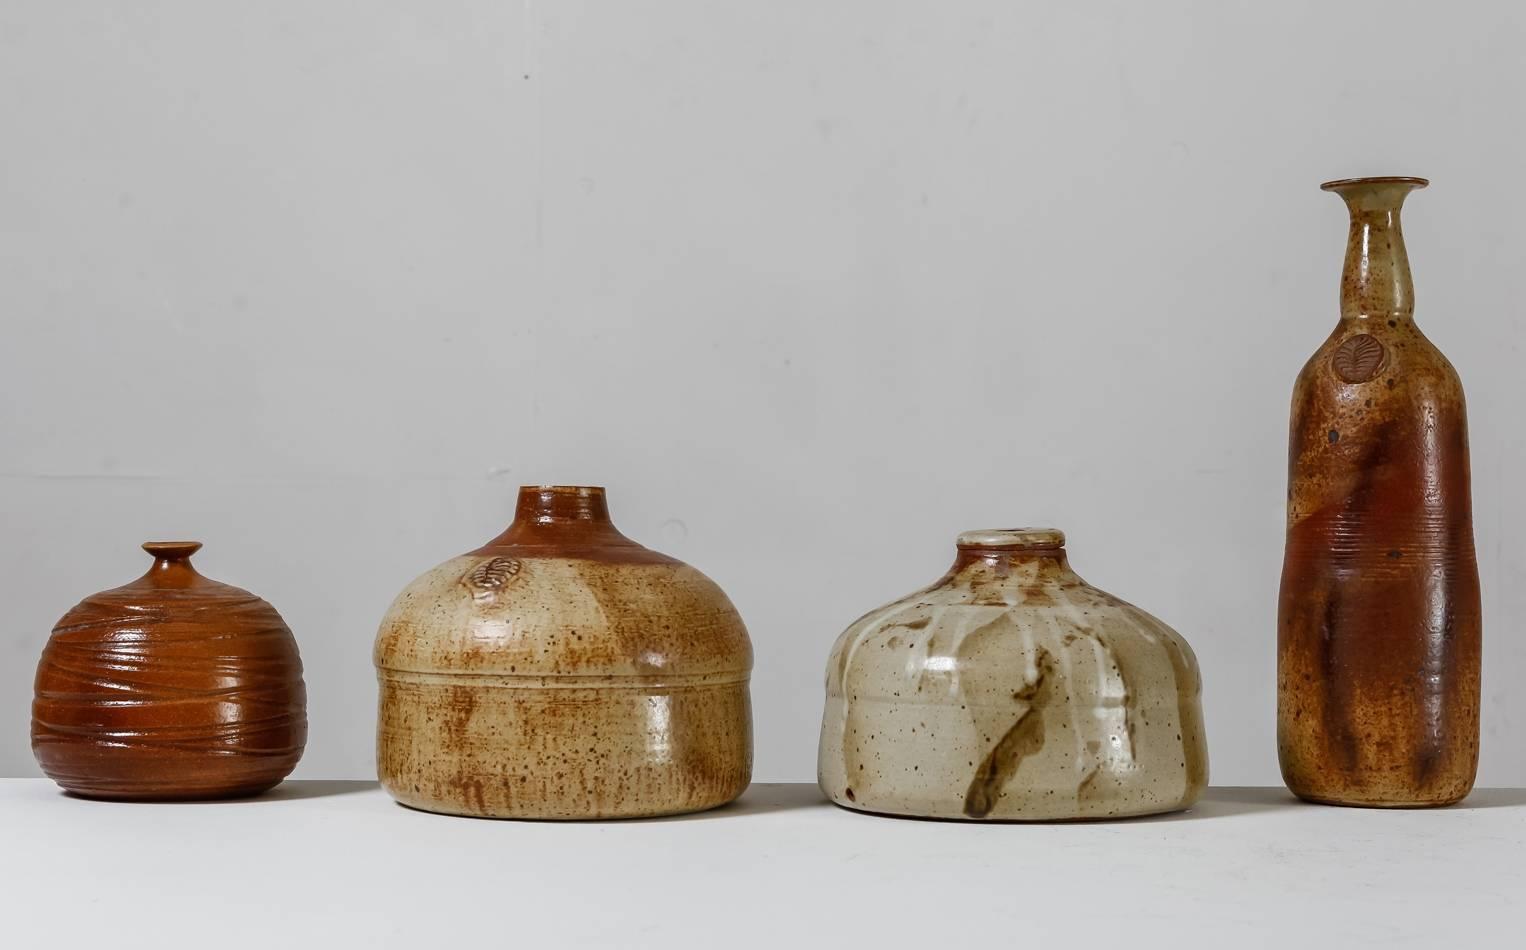 A collection of four vases by French ceramist Franco Agnese.
The vases have an earth tone finish and are all marked by Agnese and in a great, never used, condition.

The smallest piece of this collection has a diameter of 17 cm (6.7